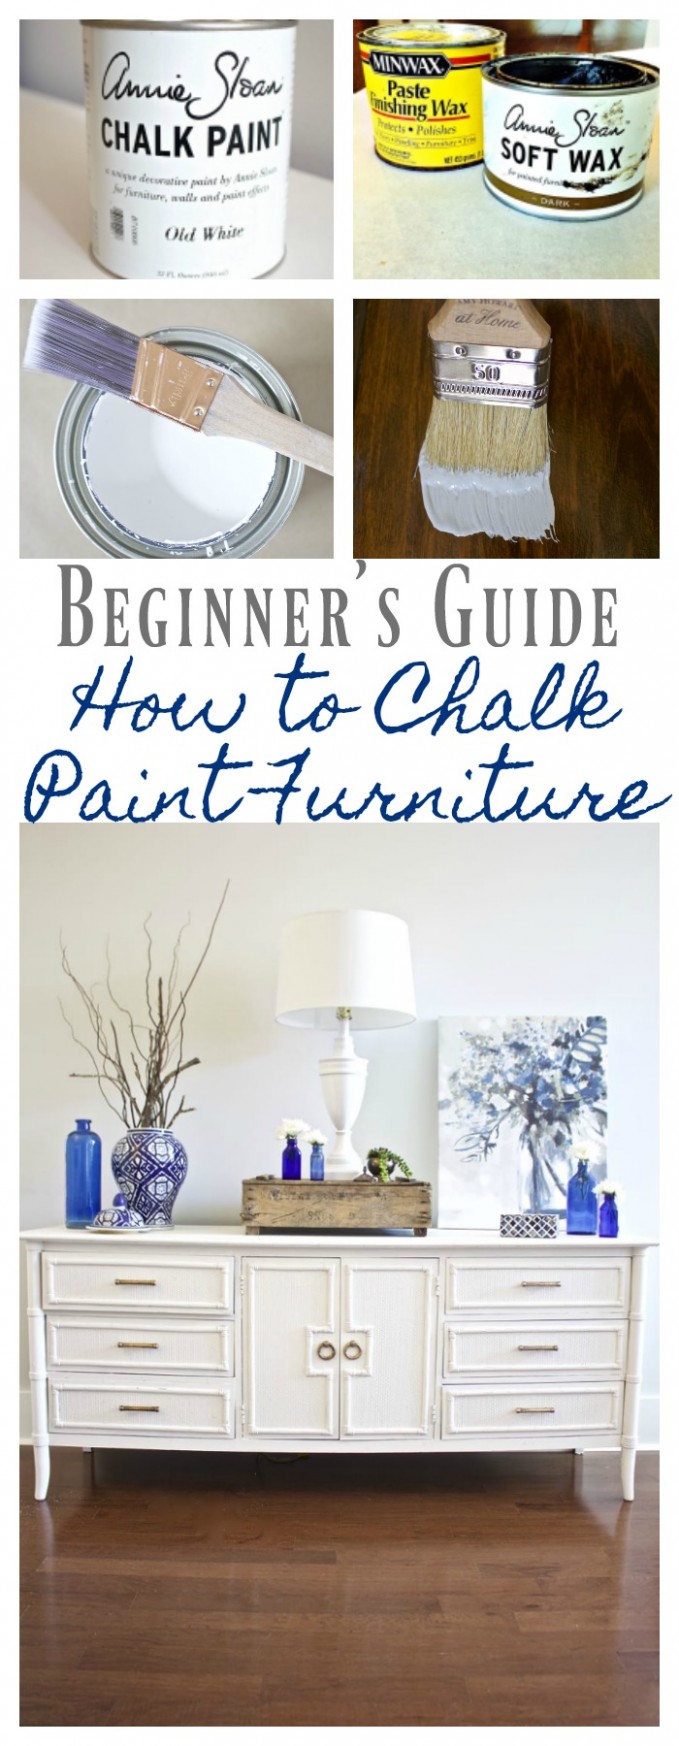 How To Chalk Paint Furniture Our Best Tips 7 Bees In A Pod Annie Sloan Chalk Paint Wax Near Me